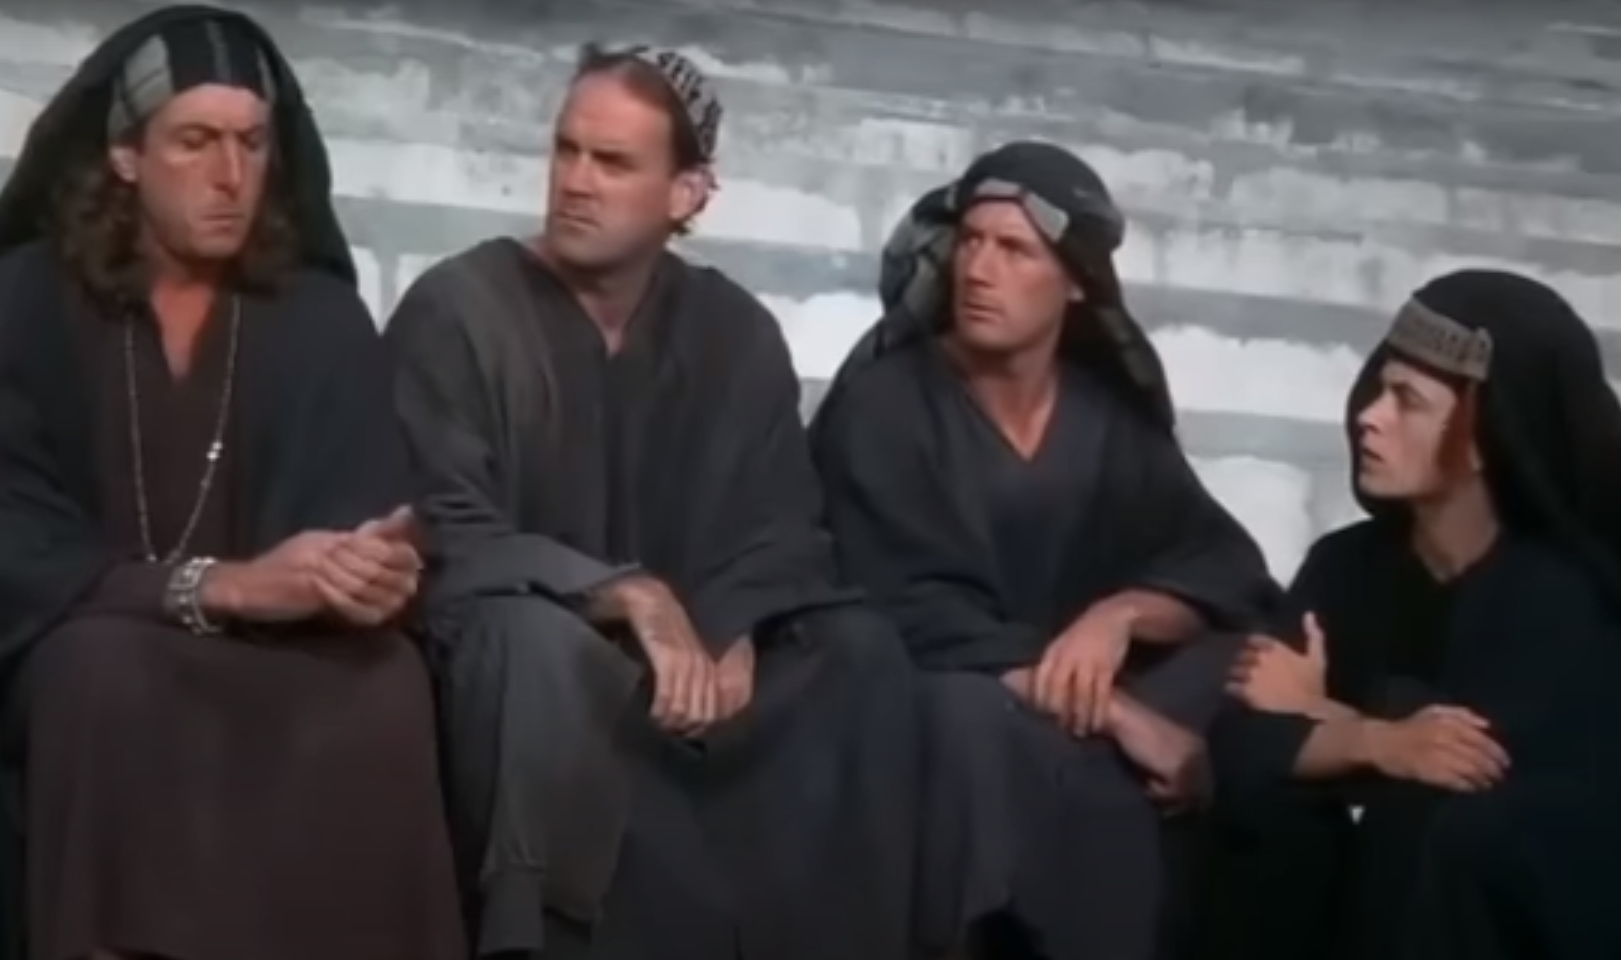 Monty Python and the right of men to have babies